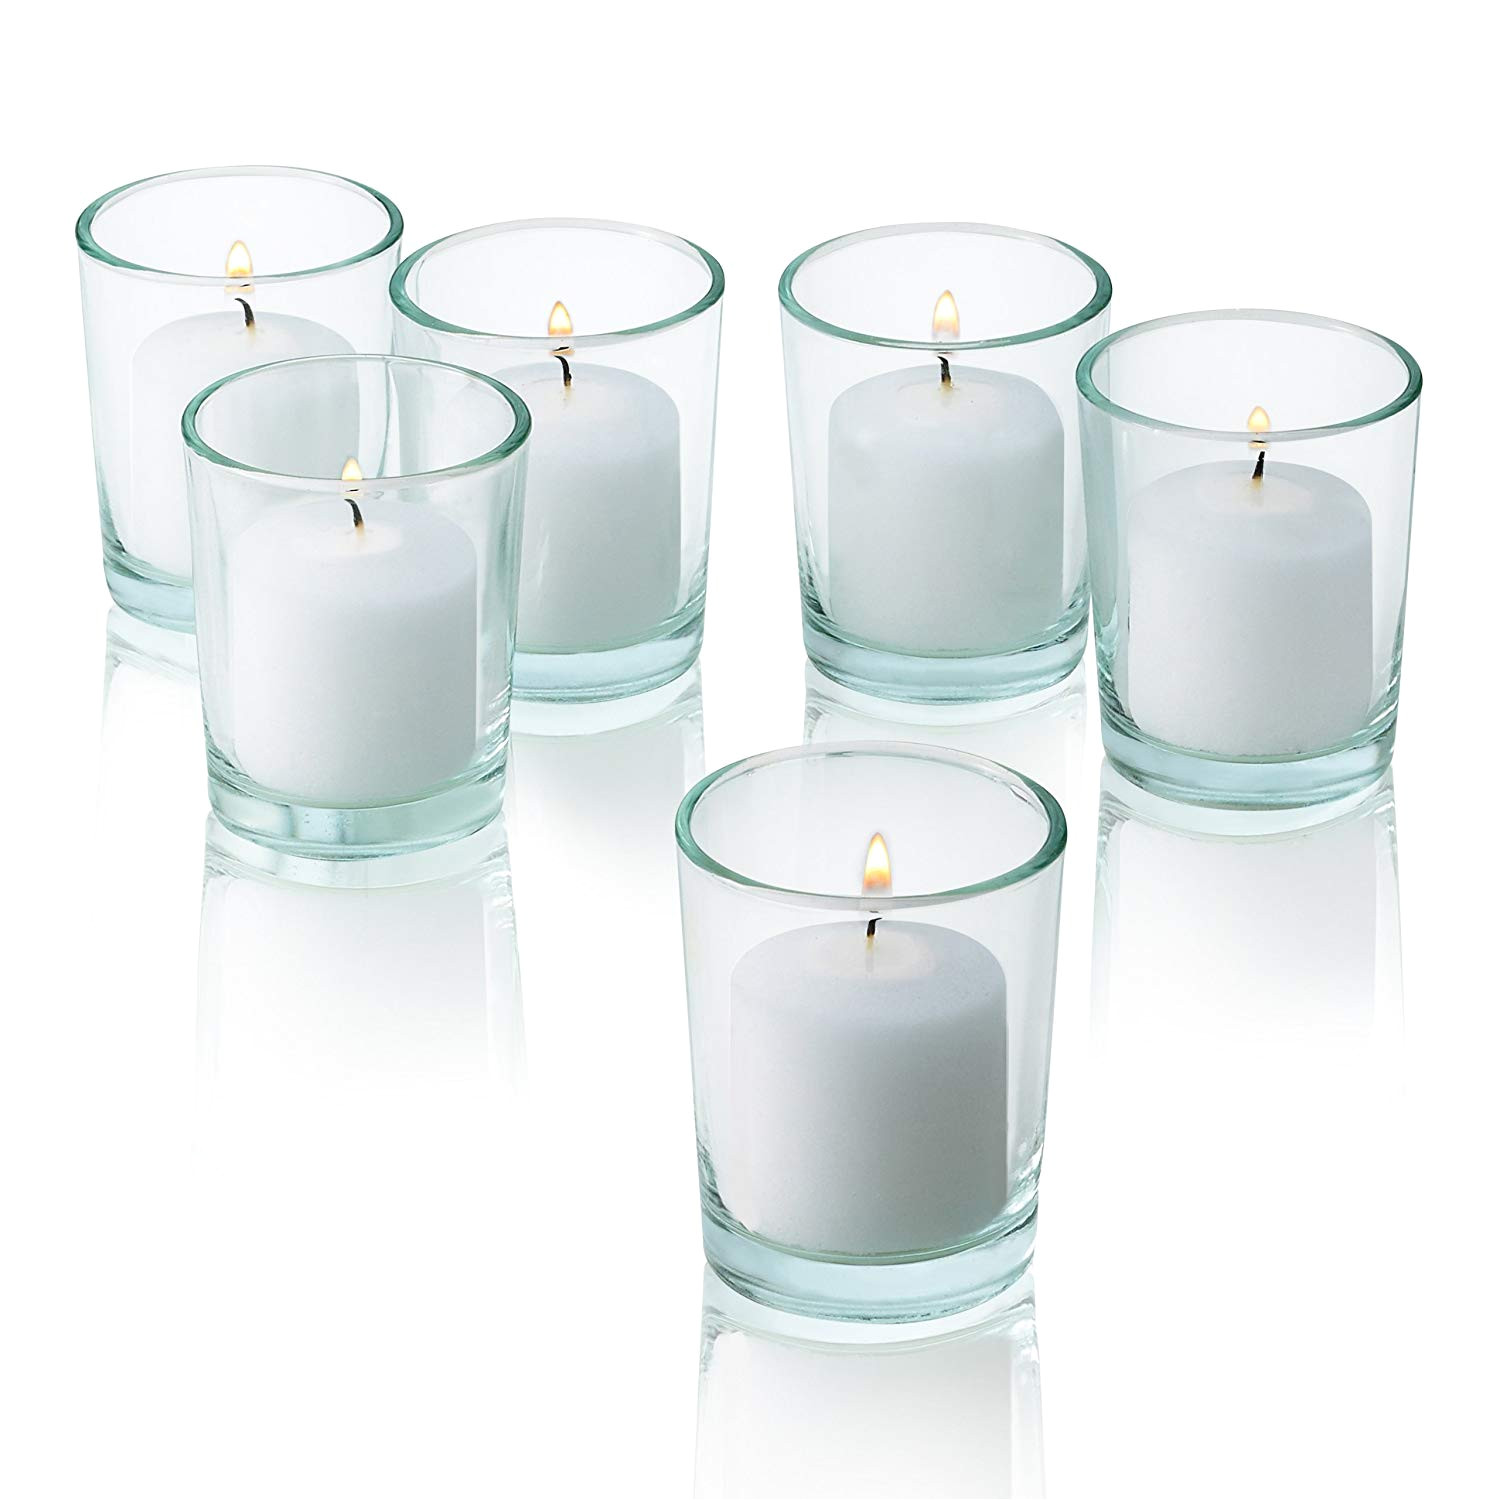 amazon com 10 hour white unscented votive candles bulk set of 288 made in usa home kitchen